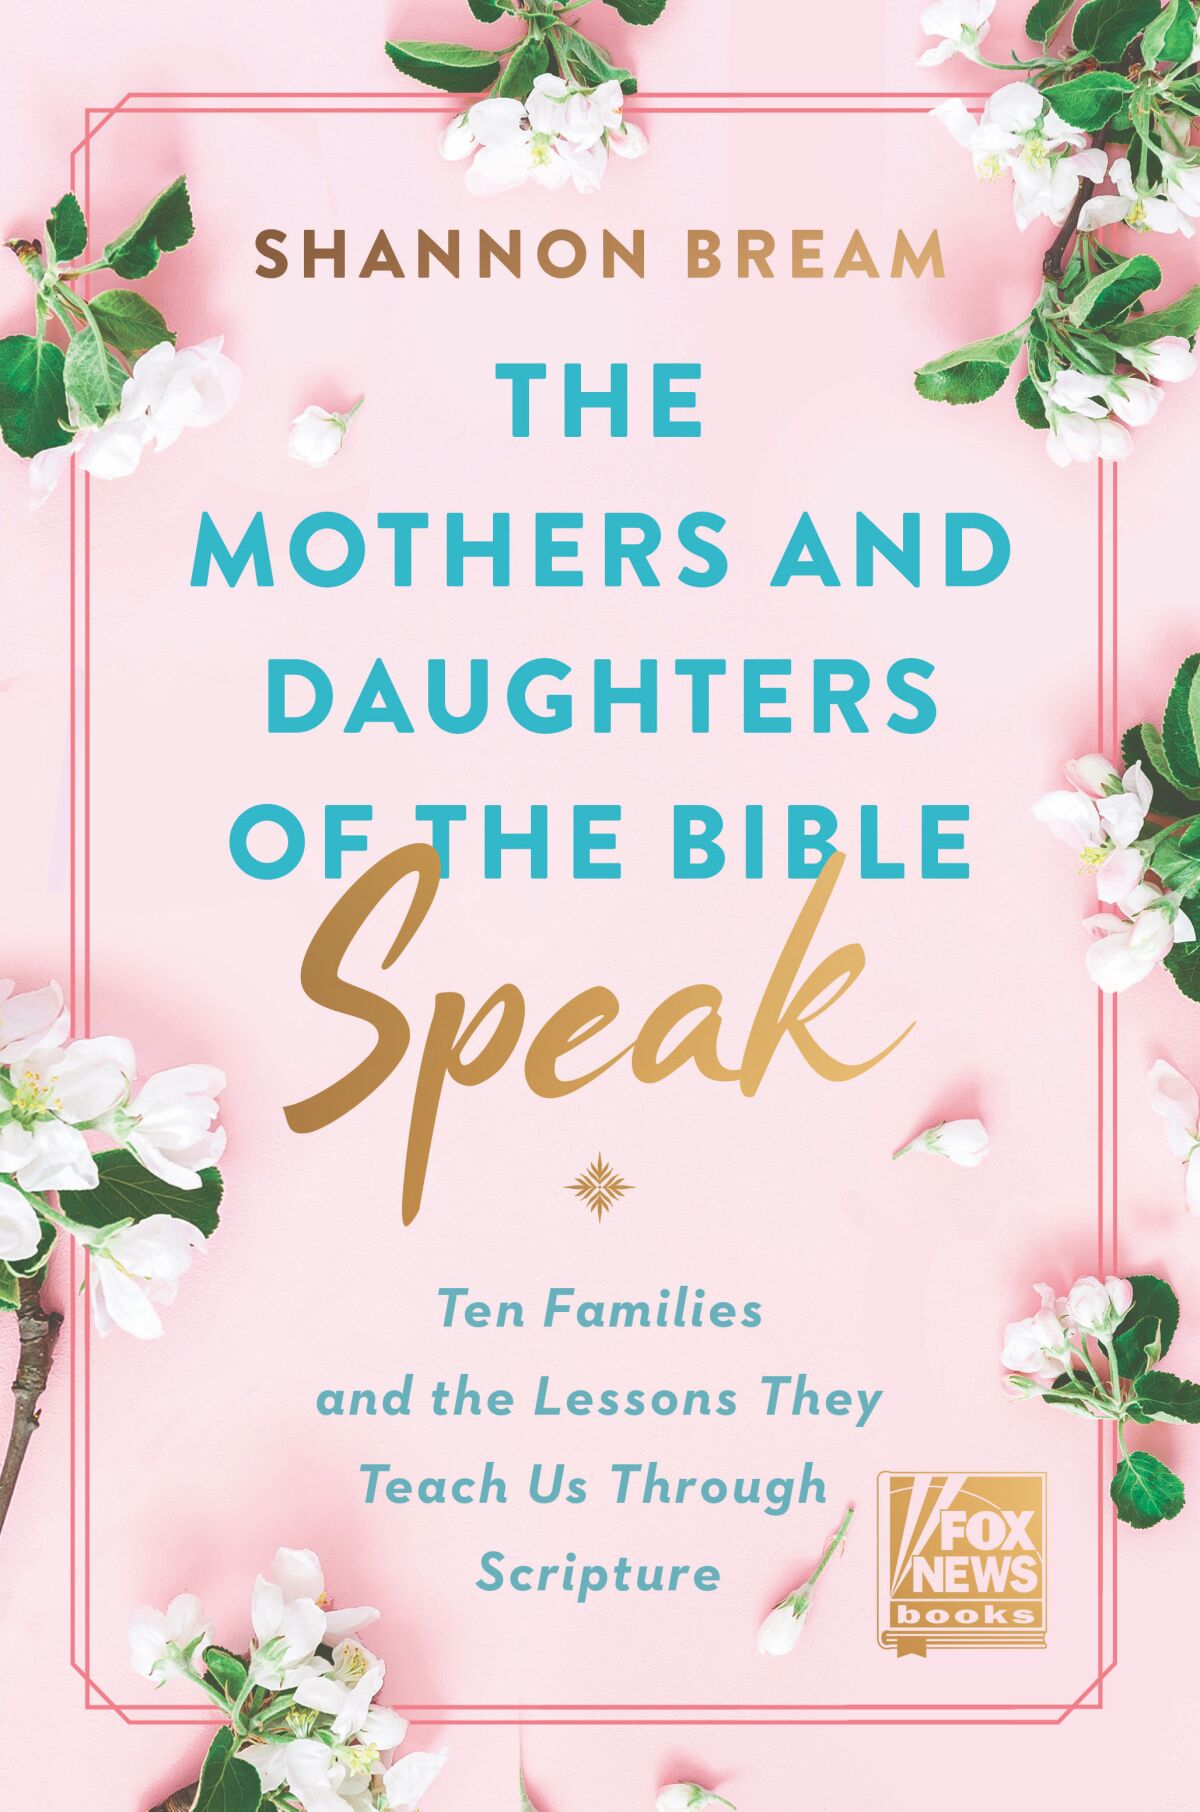 The cover of "The Mothers and Daughters of the Bible Speak" 